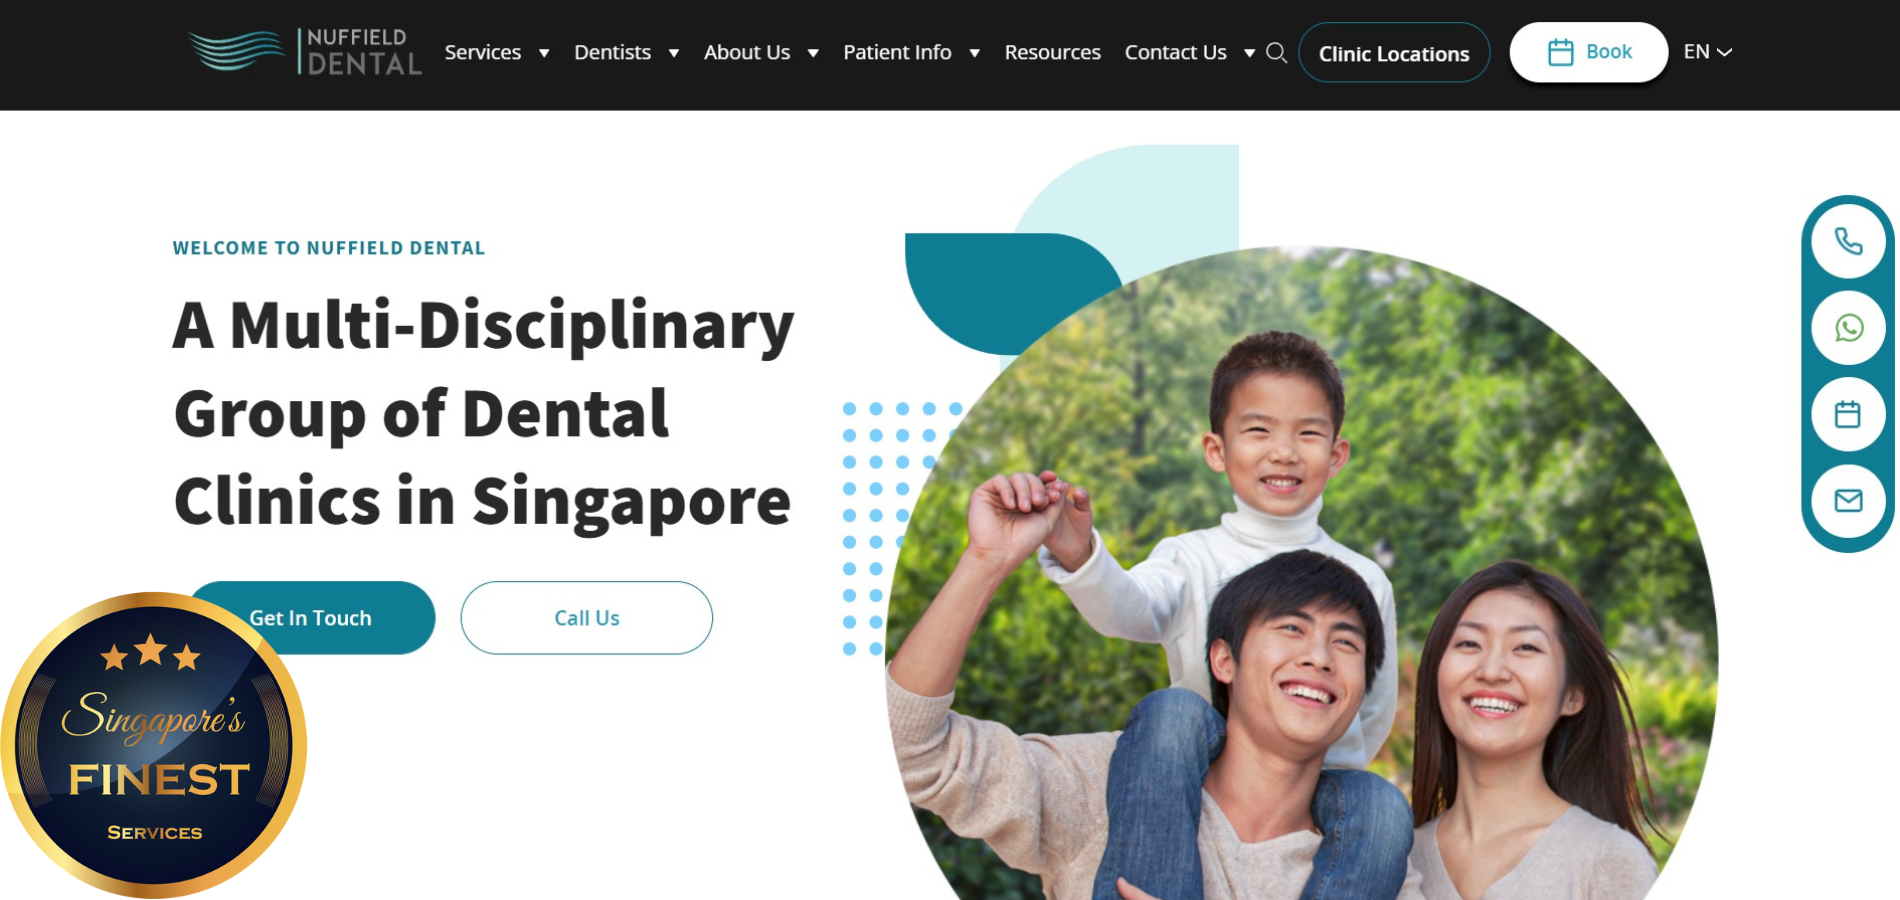 The Finest 24 Hour Dental Clinics in Singapore